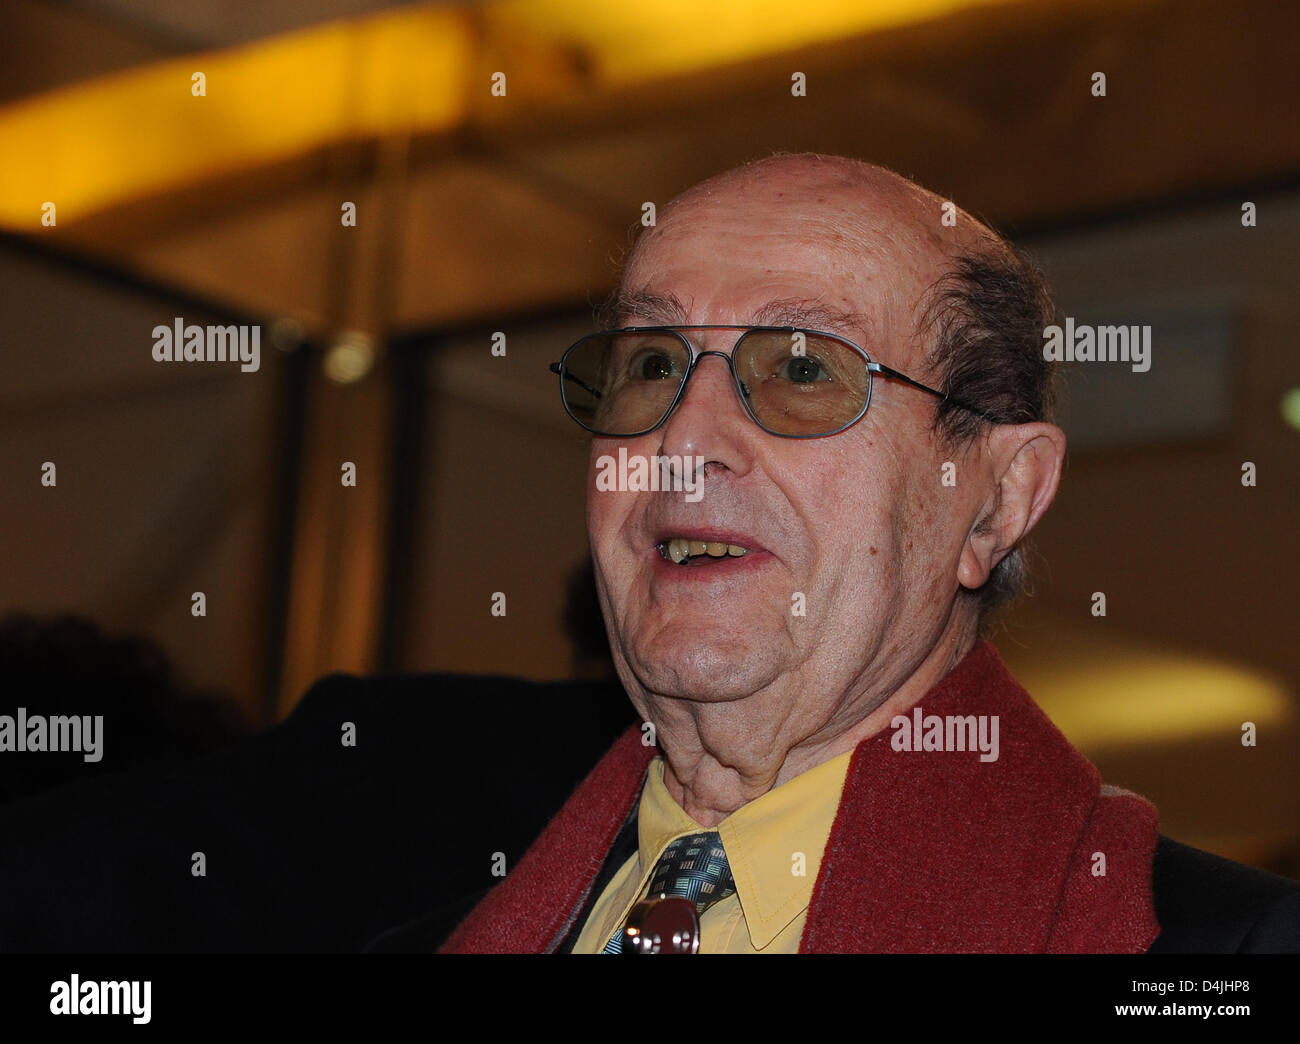 Portuguese director Manoel de Oliveira is pictured during the 59th Berlin International Film Festival in Berlin, Germany, 10 February 2009. The still active 100-year-old director de Oliveira was honoured with the lifetime achievement award, the ?Berlinale Camera?. Photo: Jens Kalaene Stock Photo